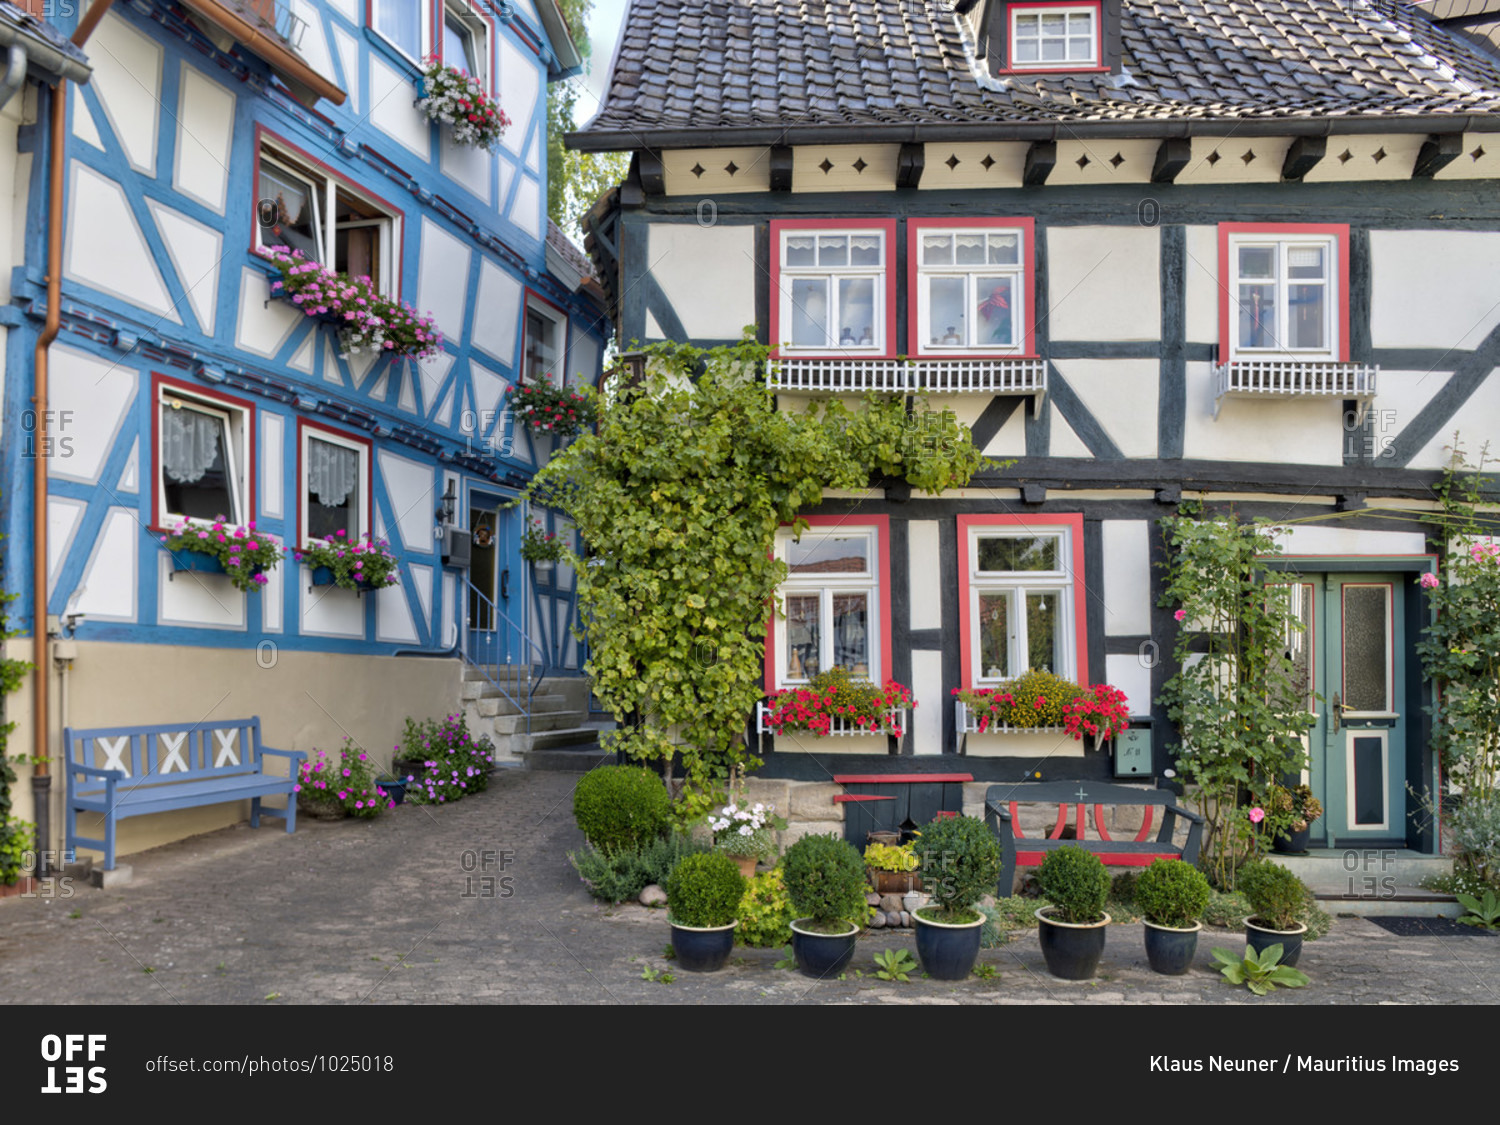 Half-timbered house, floral decoration, window, house view, old town, Bad Sooden-Allendorf, Hesssen, Germany, Europe